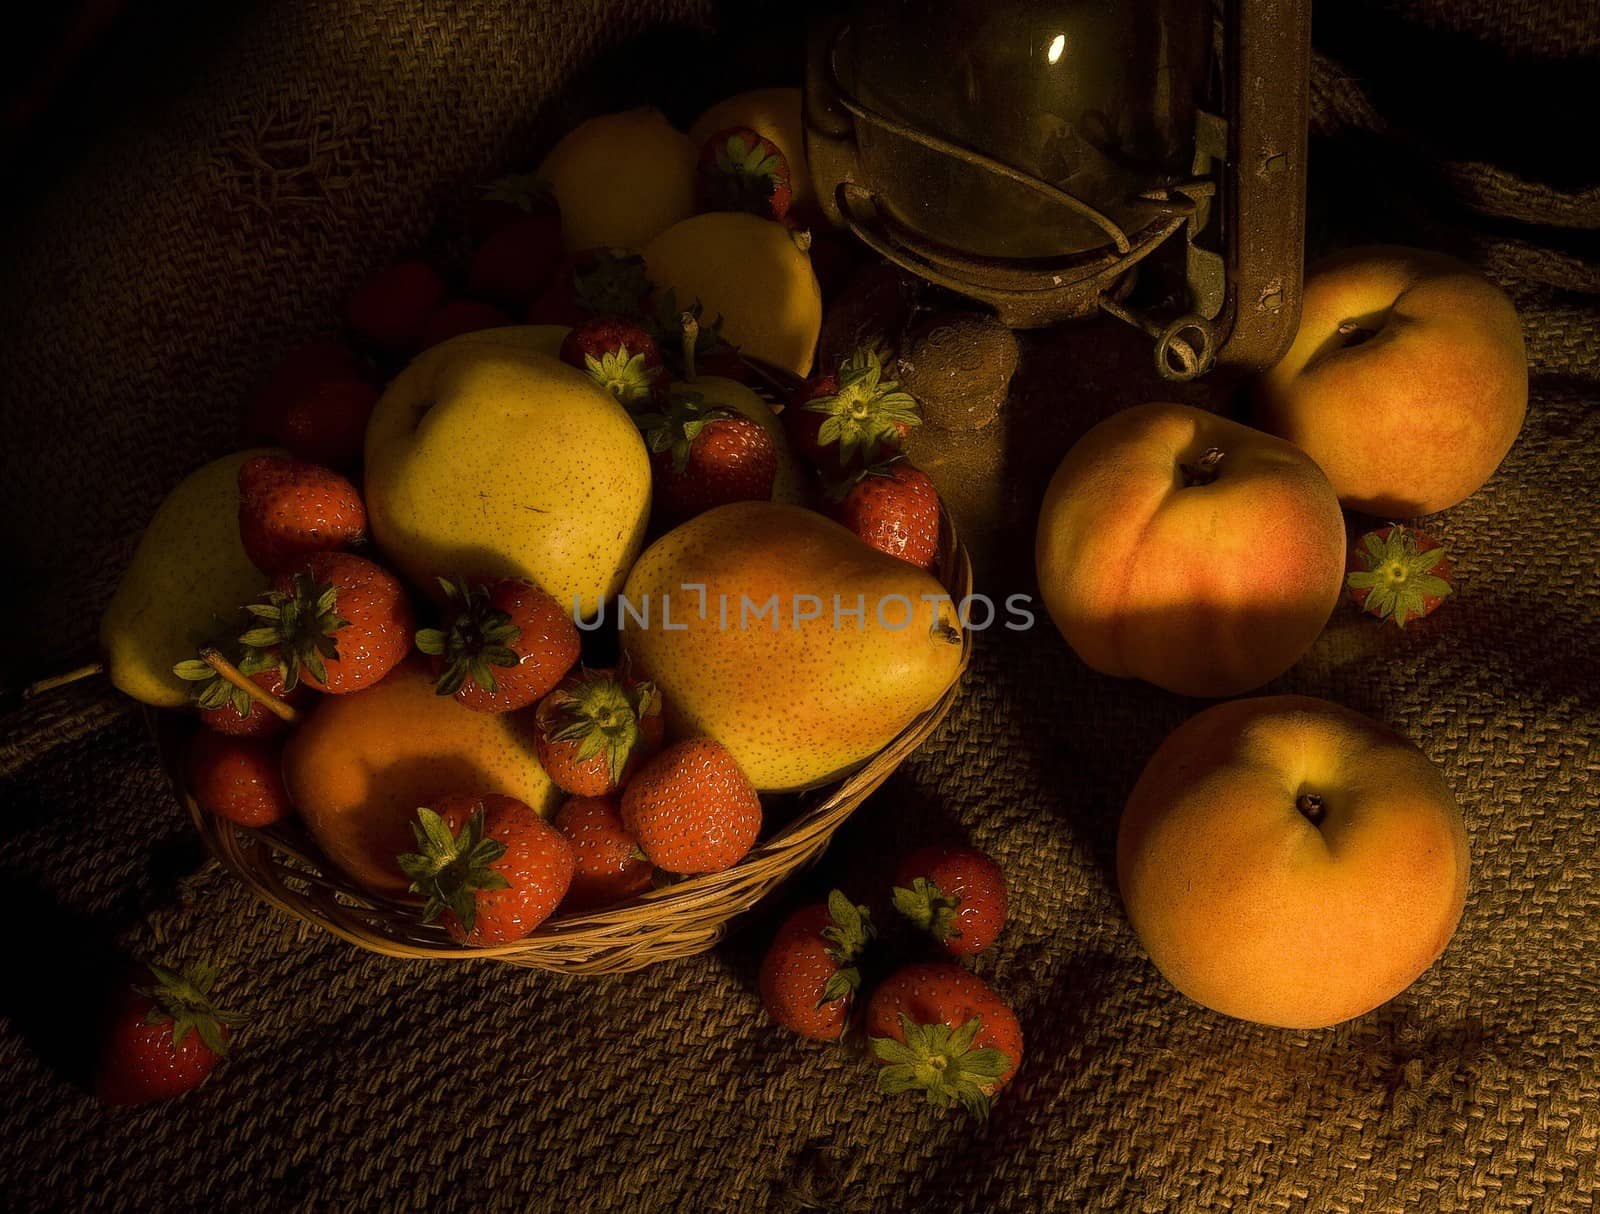 Fruit on Hessian by andrewroland